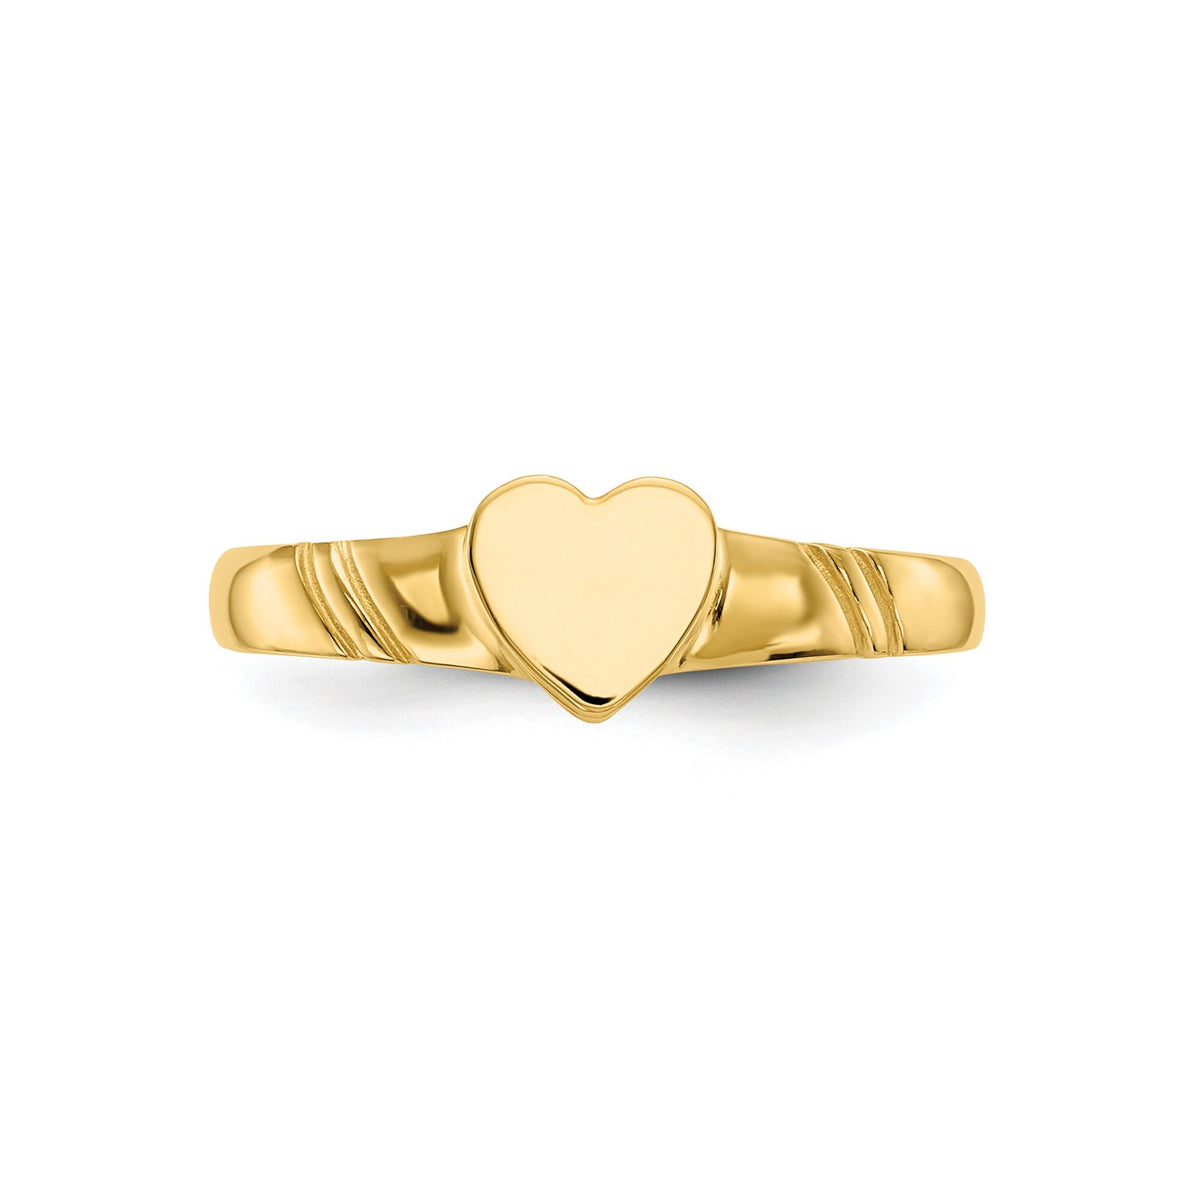 Genuine 14k Yellow Gold Heart Ring Baby to Toddler / Band Size 1- 5 Baby - Toddler-Small Adult Finger Size Children's Ring Band with Heart